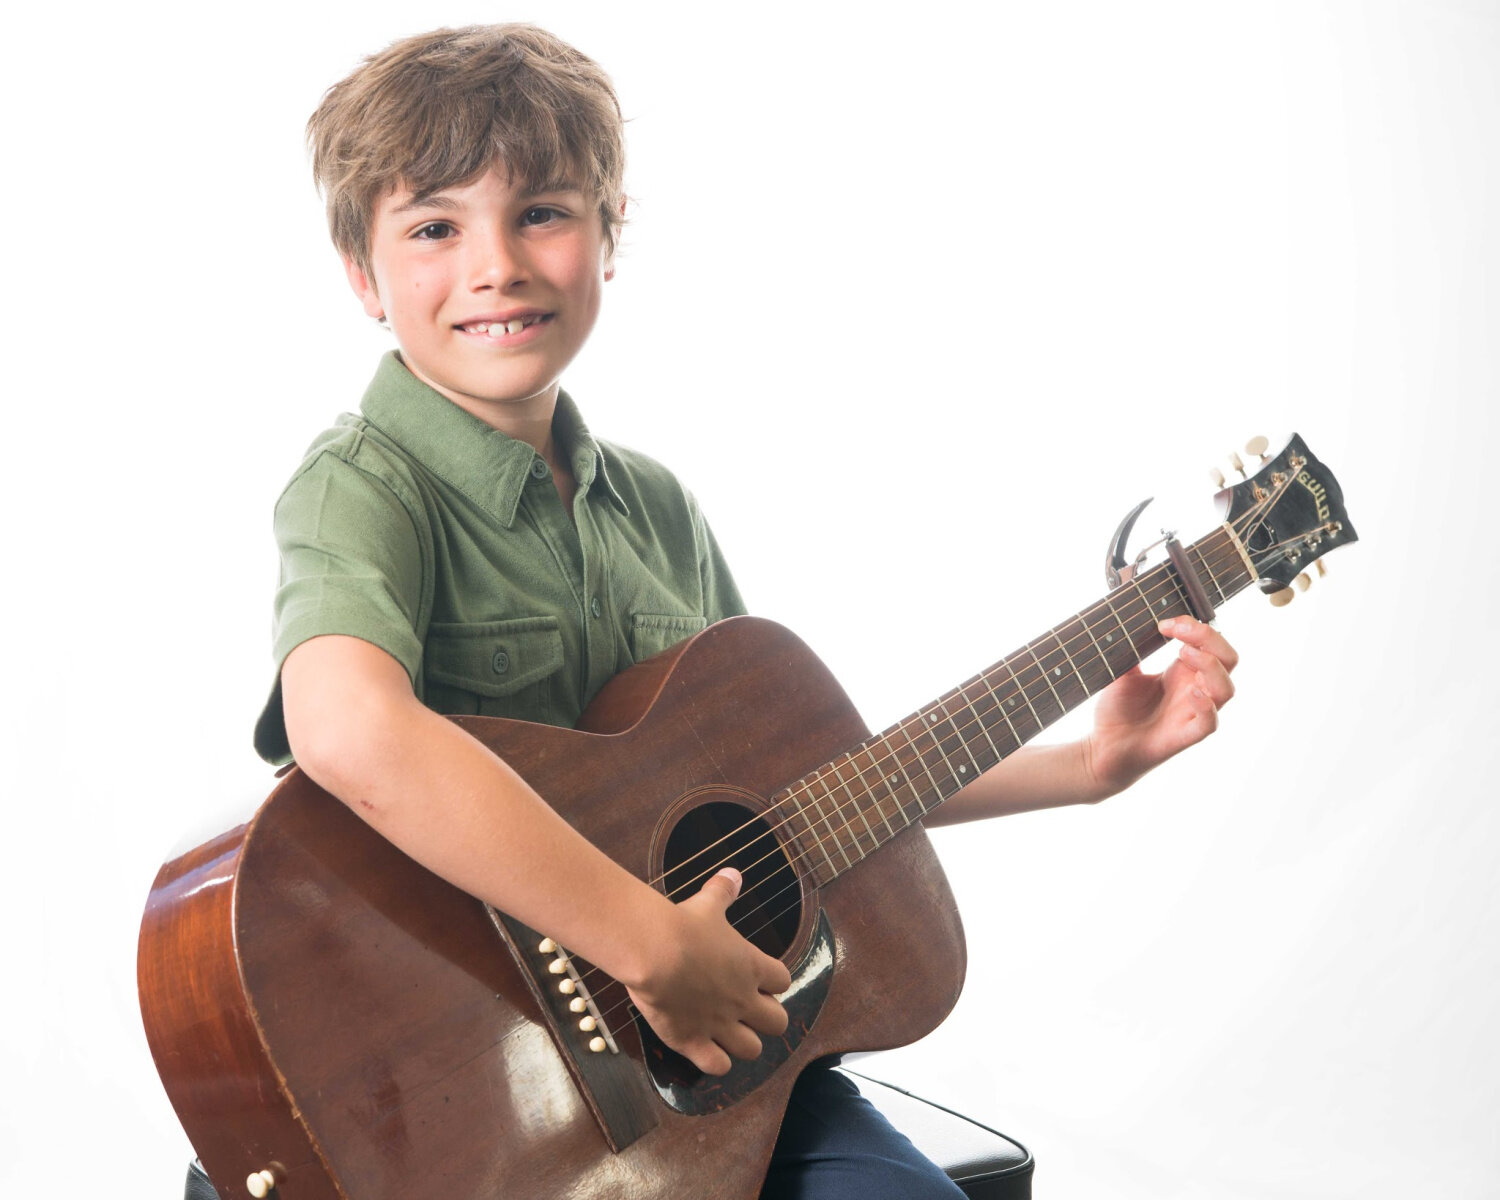   Guitar Lessons   in Mendota Heights   for beginner, intermediate, and advanced students of all ages   CALL  651-263-9475  TO SCHEDULE YOUR FIRST LESSON   REQUEST INFO  